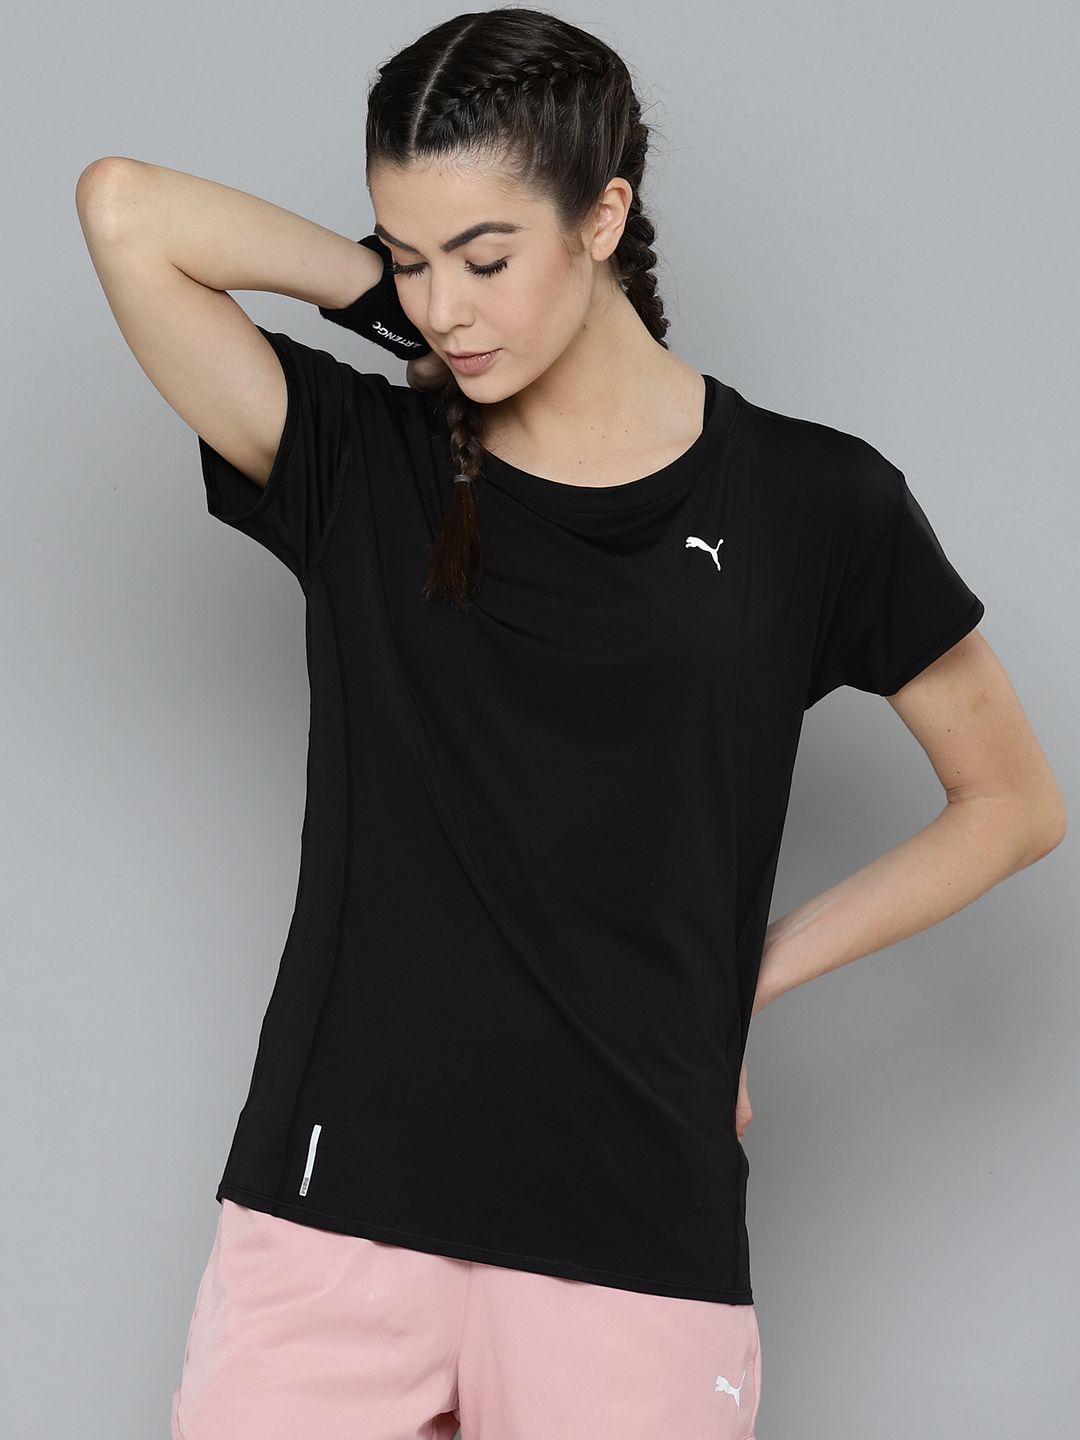 Puma Women Black Solid Training Sustainable Sustainable T-shirt Price in India